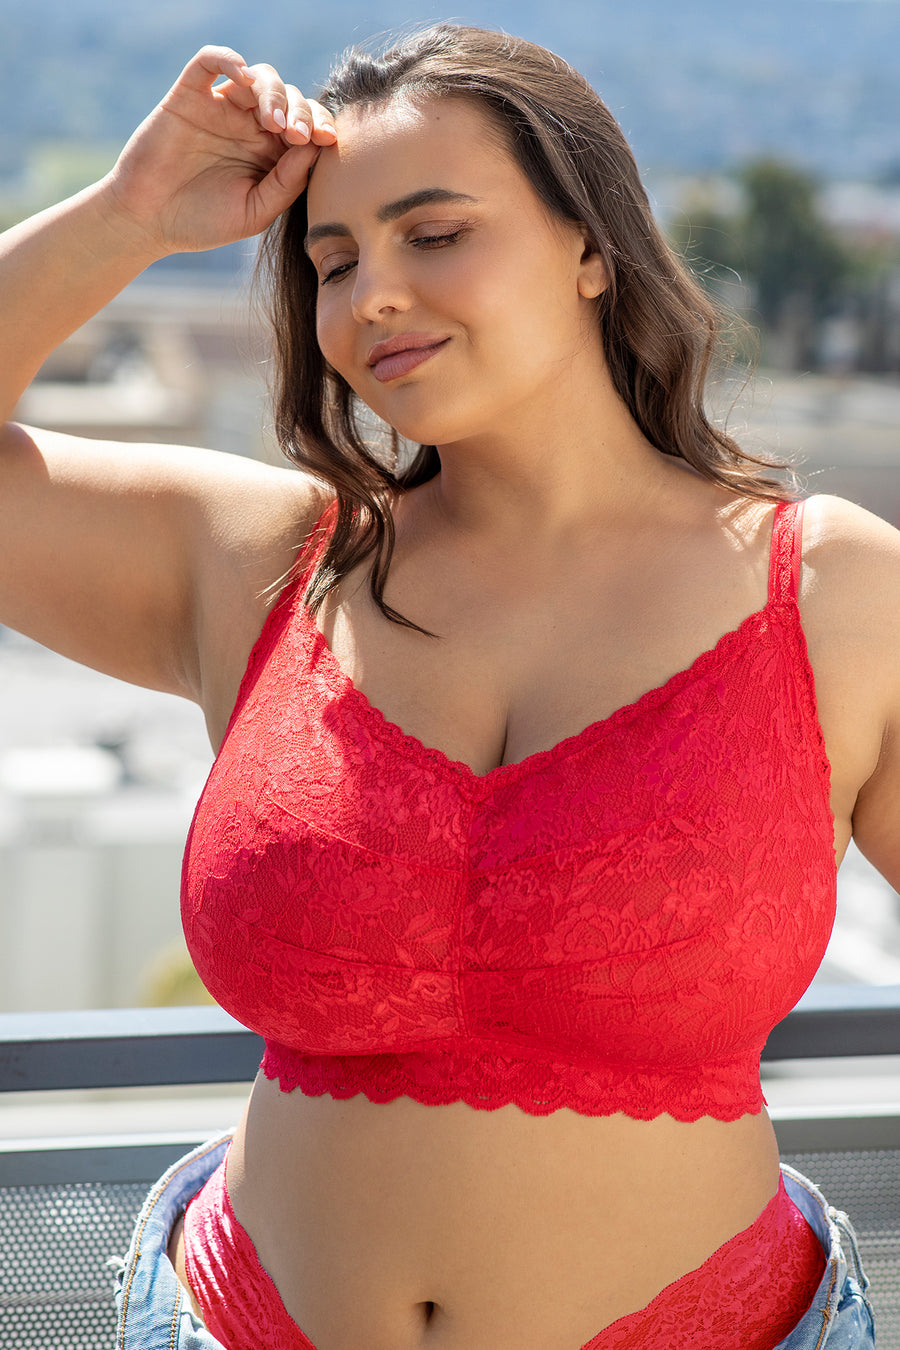 Rouge Bralette - Never Say Never Brassière Sweetie Ultra Curvy